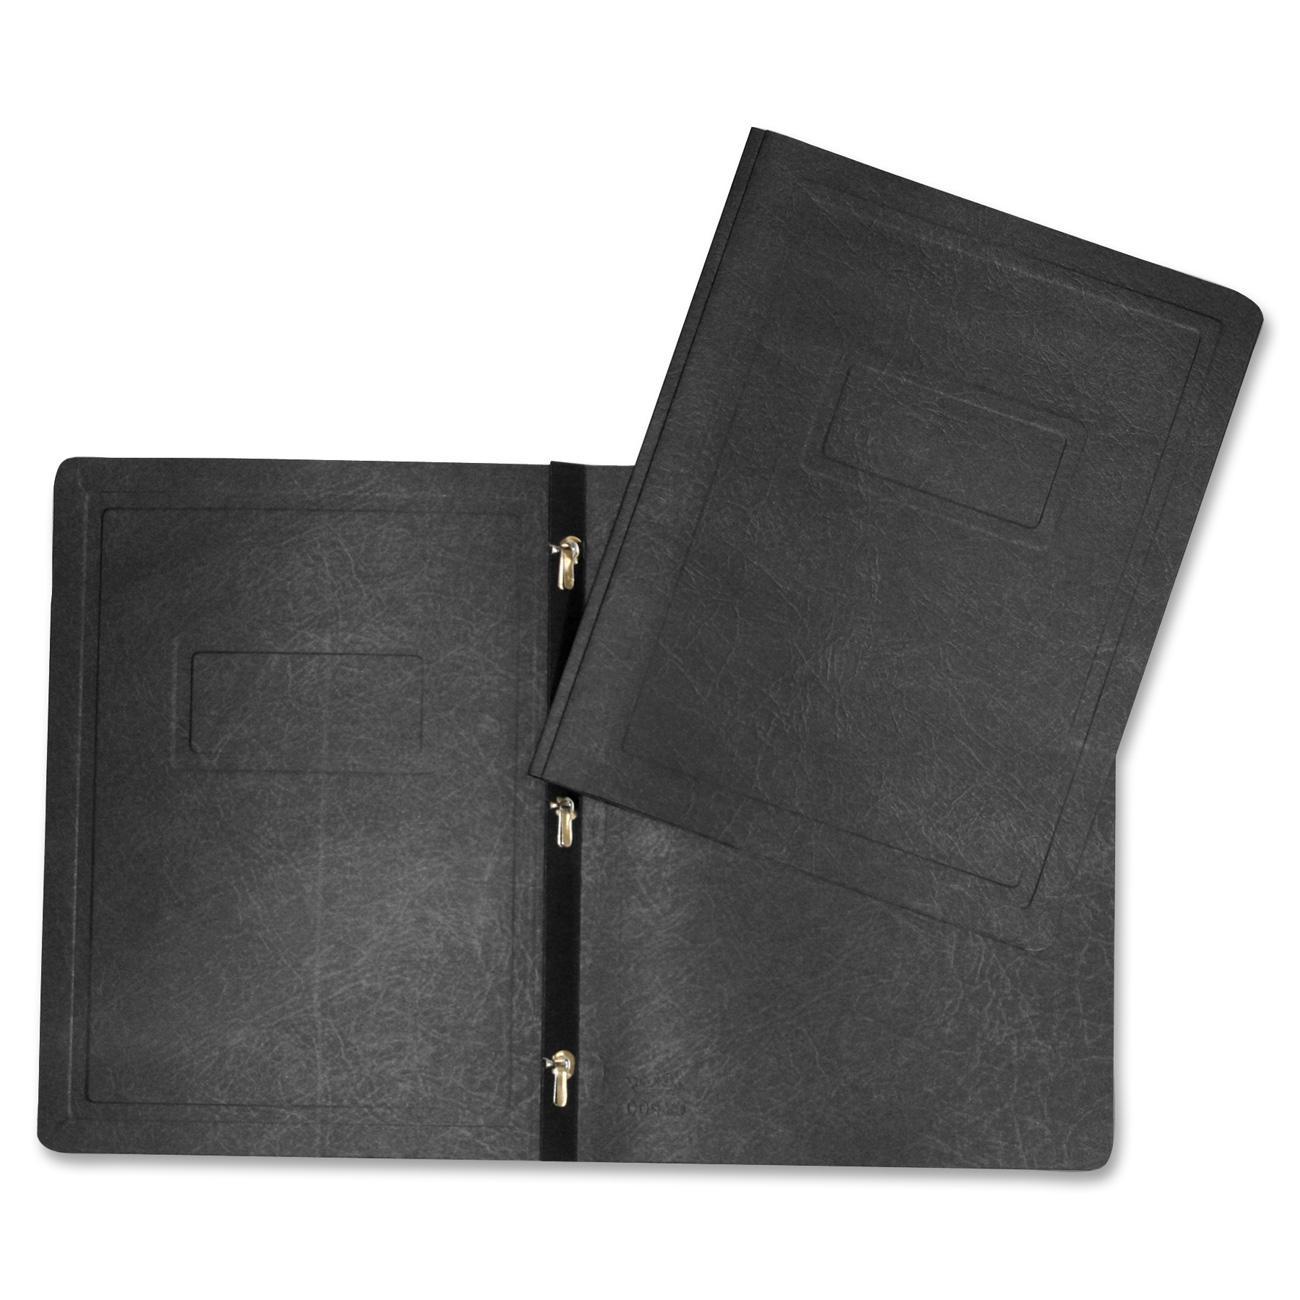 Hilroy Brief Cover, Black